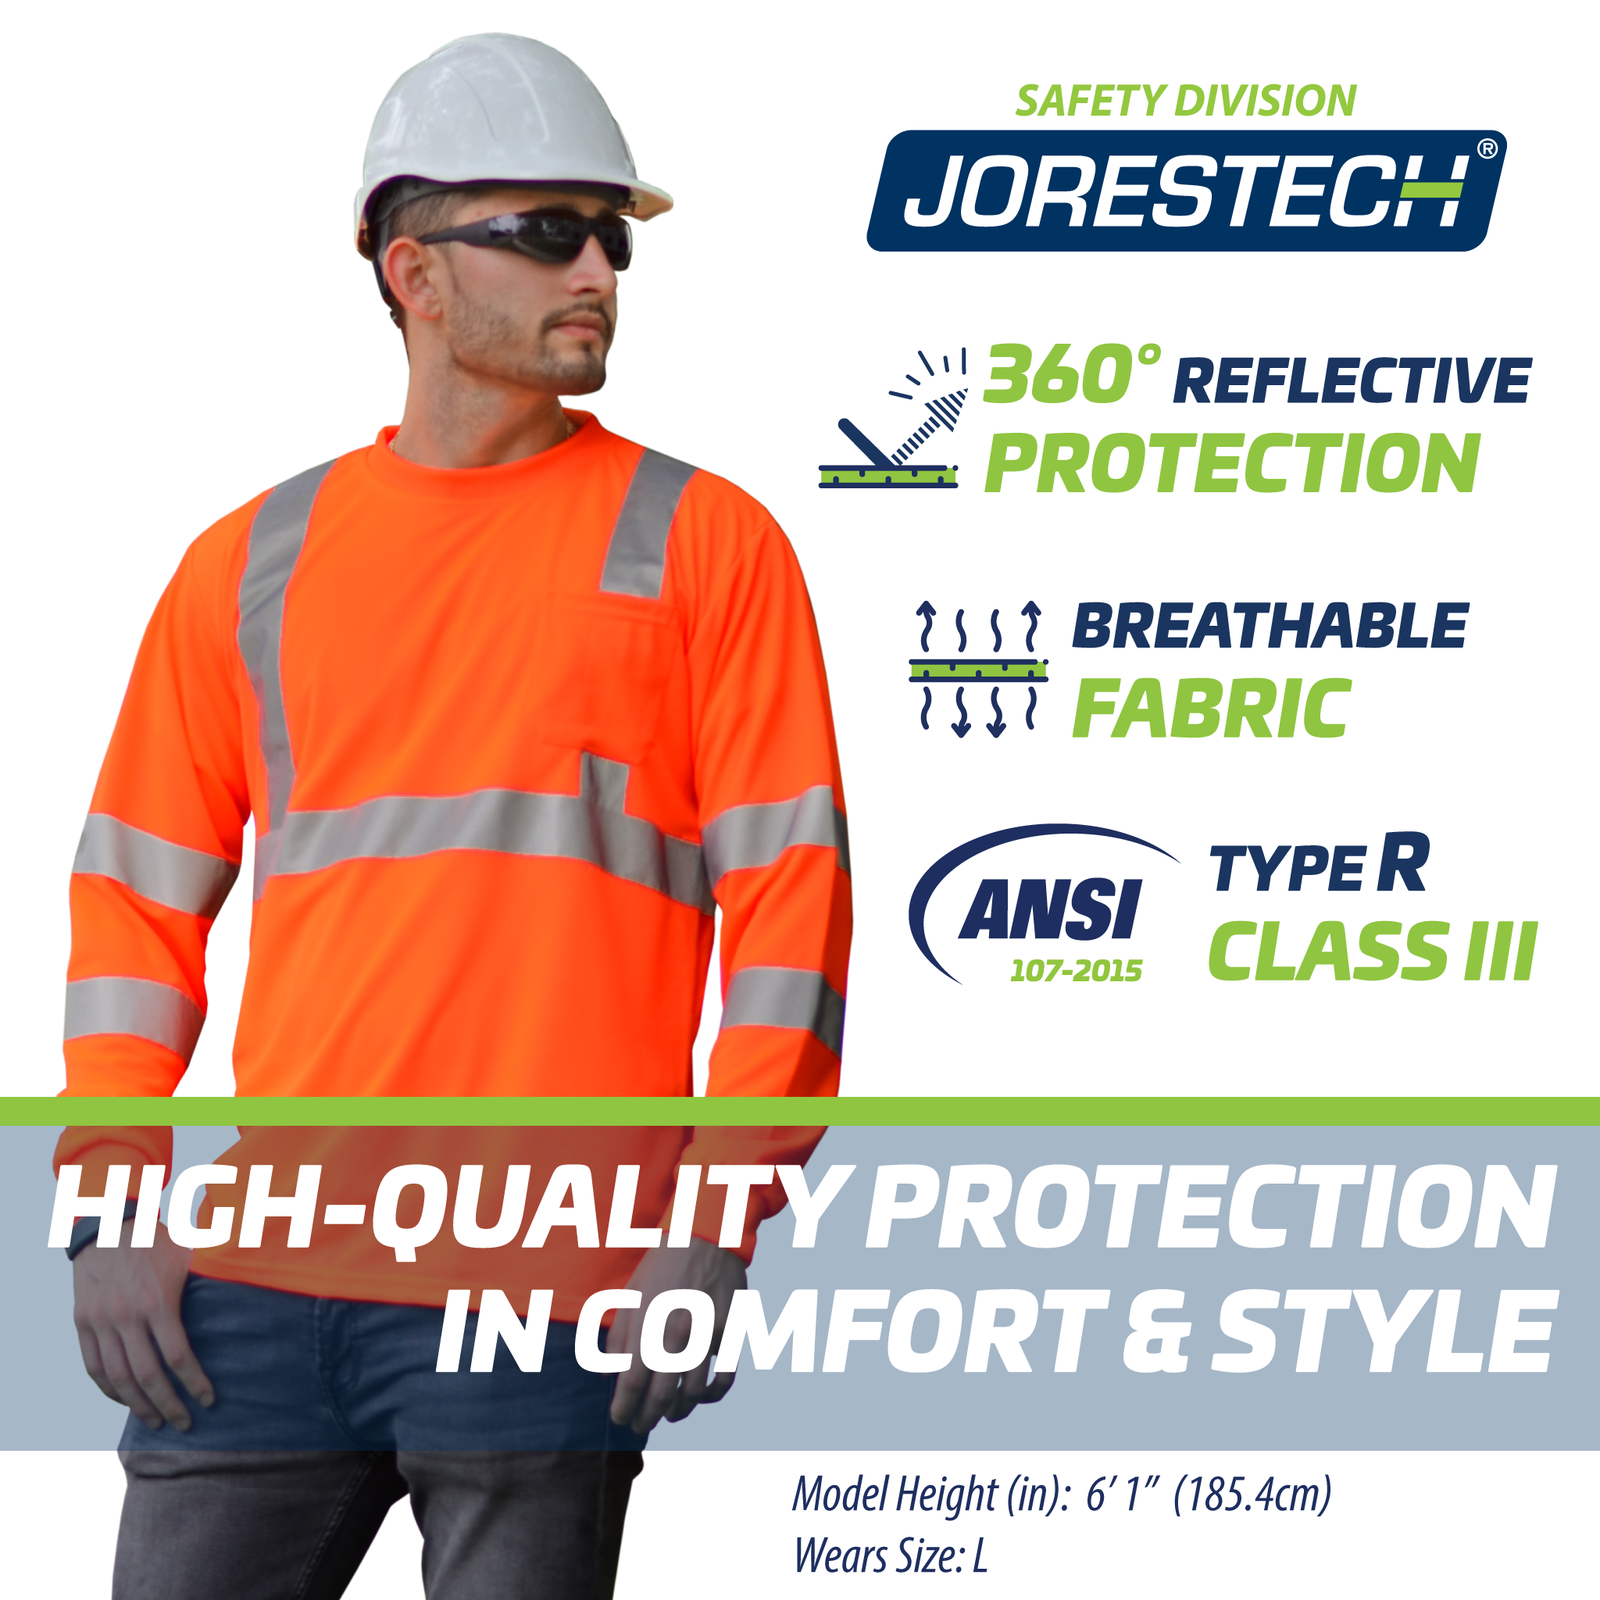 A worker wearing the orange long sleeve hi vis reflective safety pocket shirt and blue and green icons that mention 360 degrees reflective protection, breathable fabric,, ANSI type R class 3, high quality protection in comfort and style